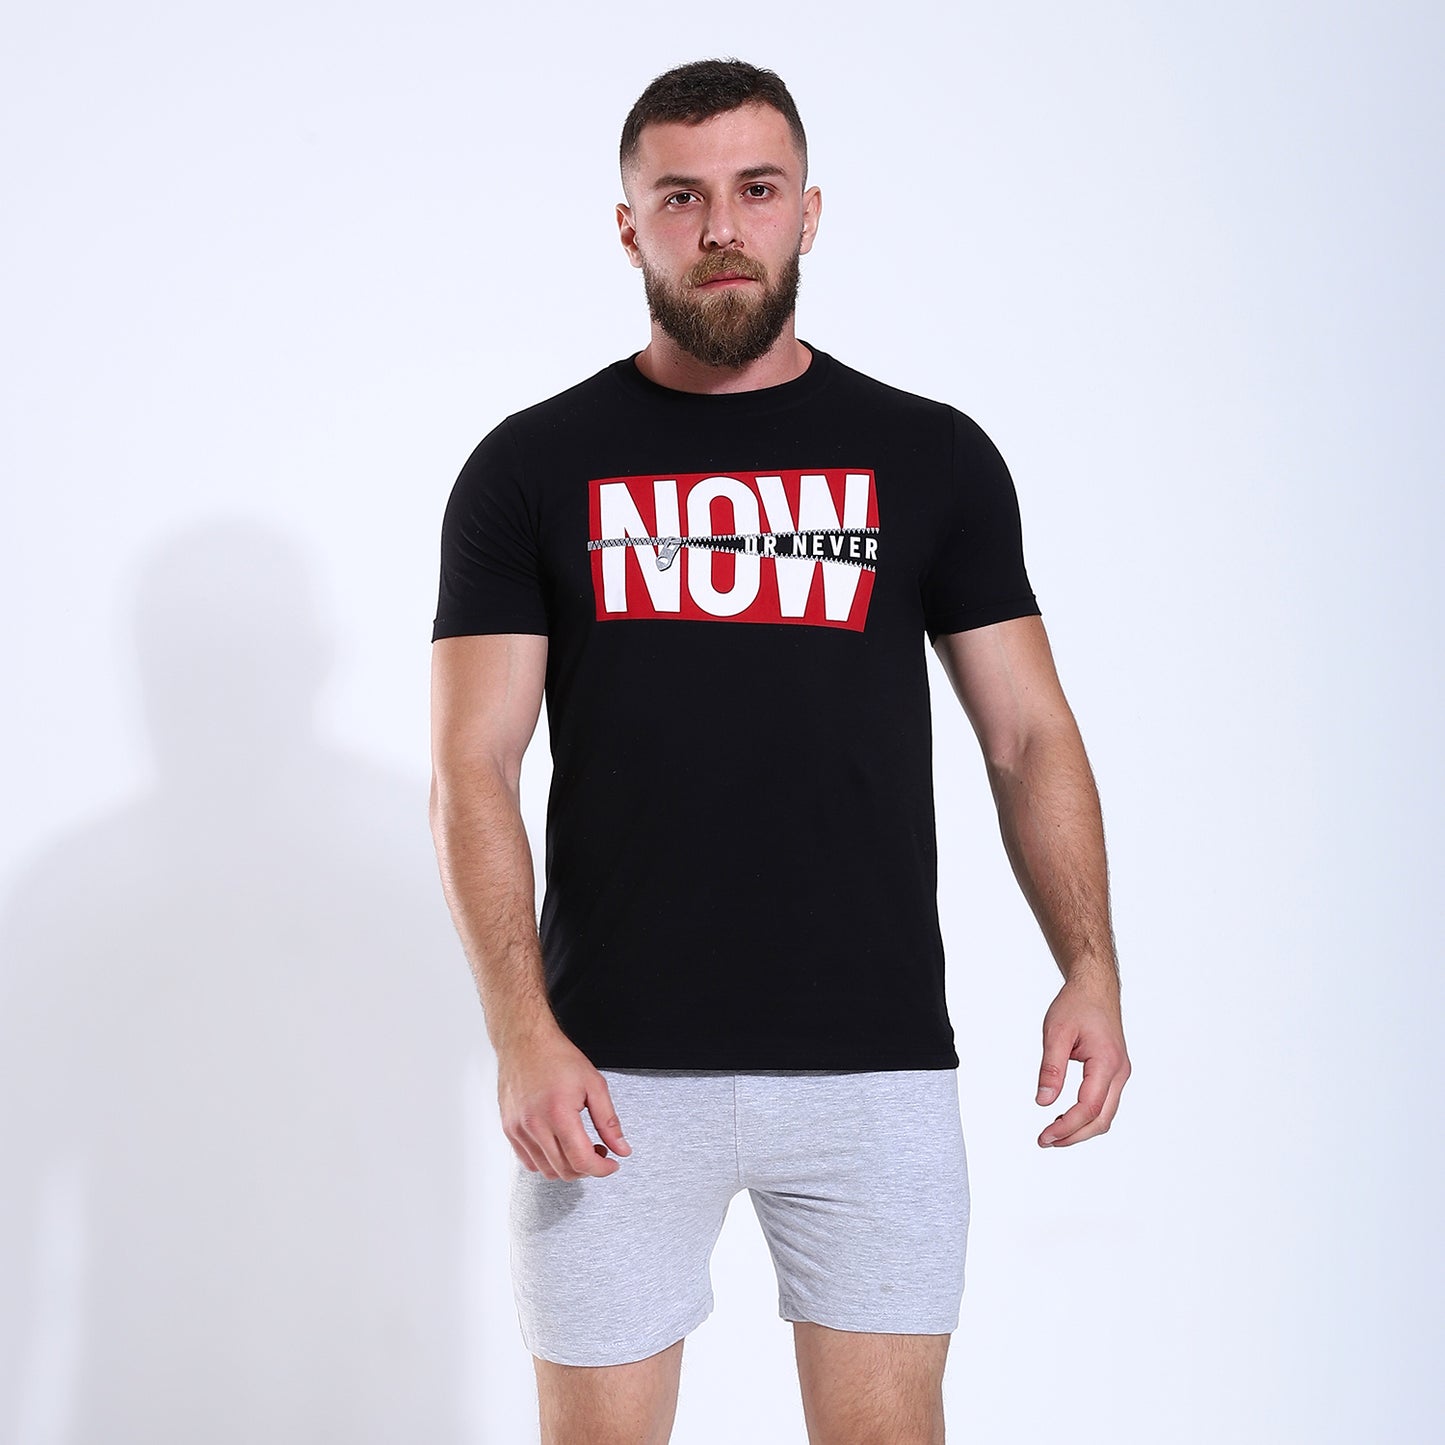 Men's "Now Or Never" Printed Short Sleeves Pajama